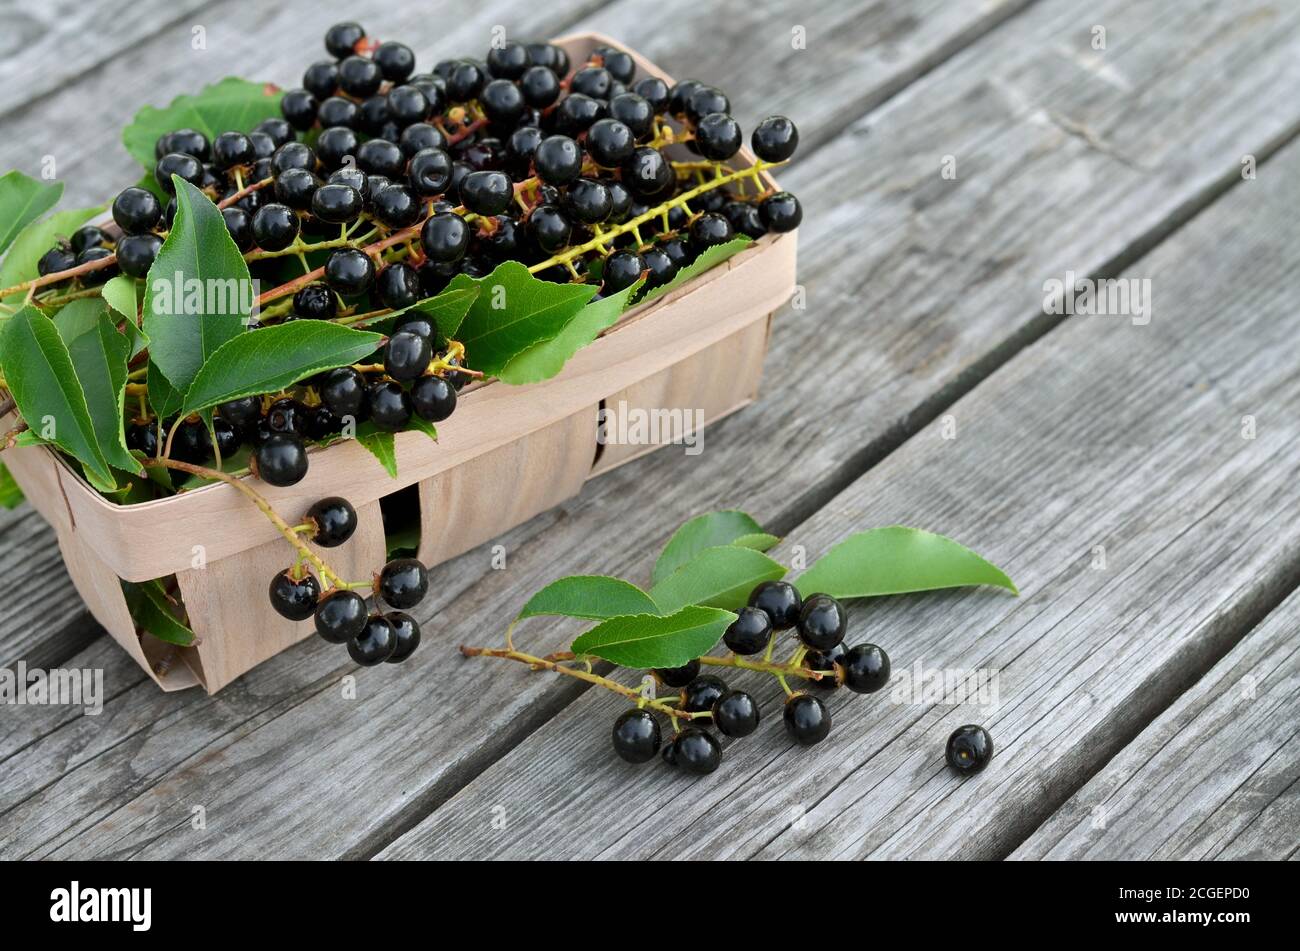 Prunus serotina. Black ripe bird cherry berries in a basket on an old wooden table close-up. Selective focus Stock Photo